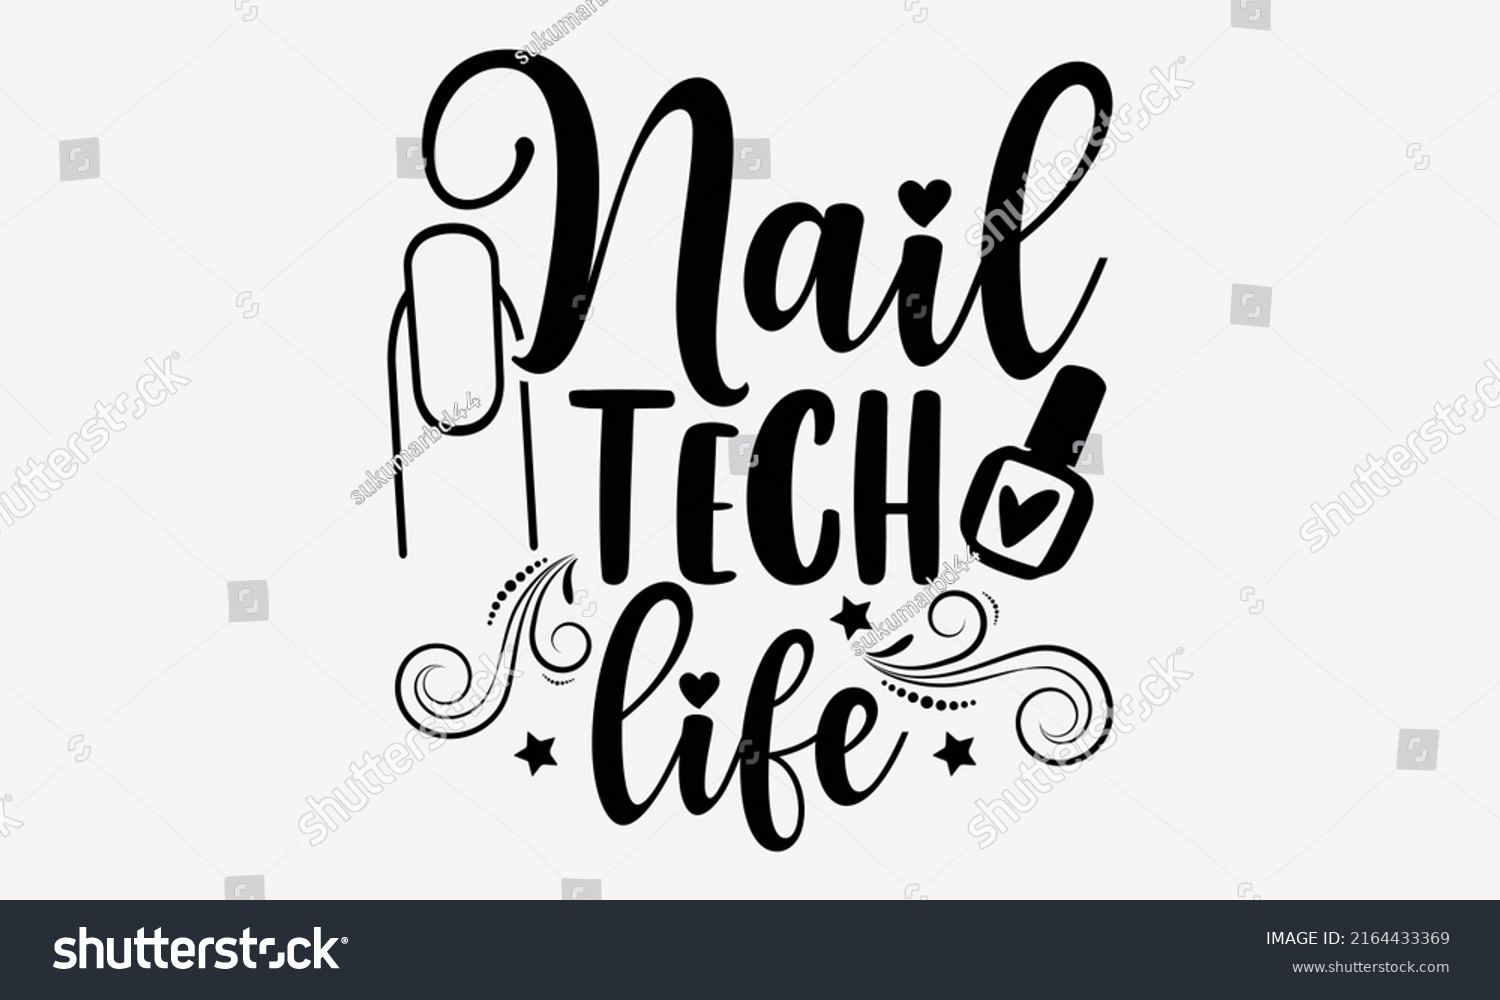 SVG of Nail tech life - Nail Tech  t shirt design, Hand drawn lettering phrase, Calligraphy graphic design, SVG Files for Cutting Cricut and Silhouette svg